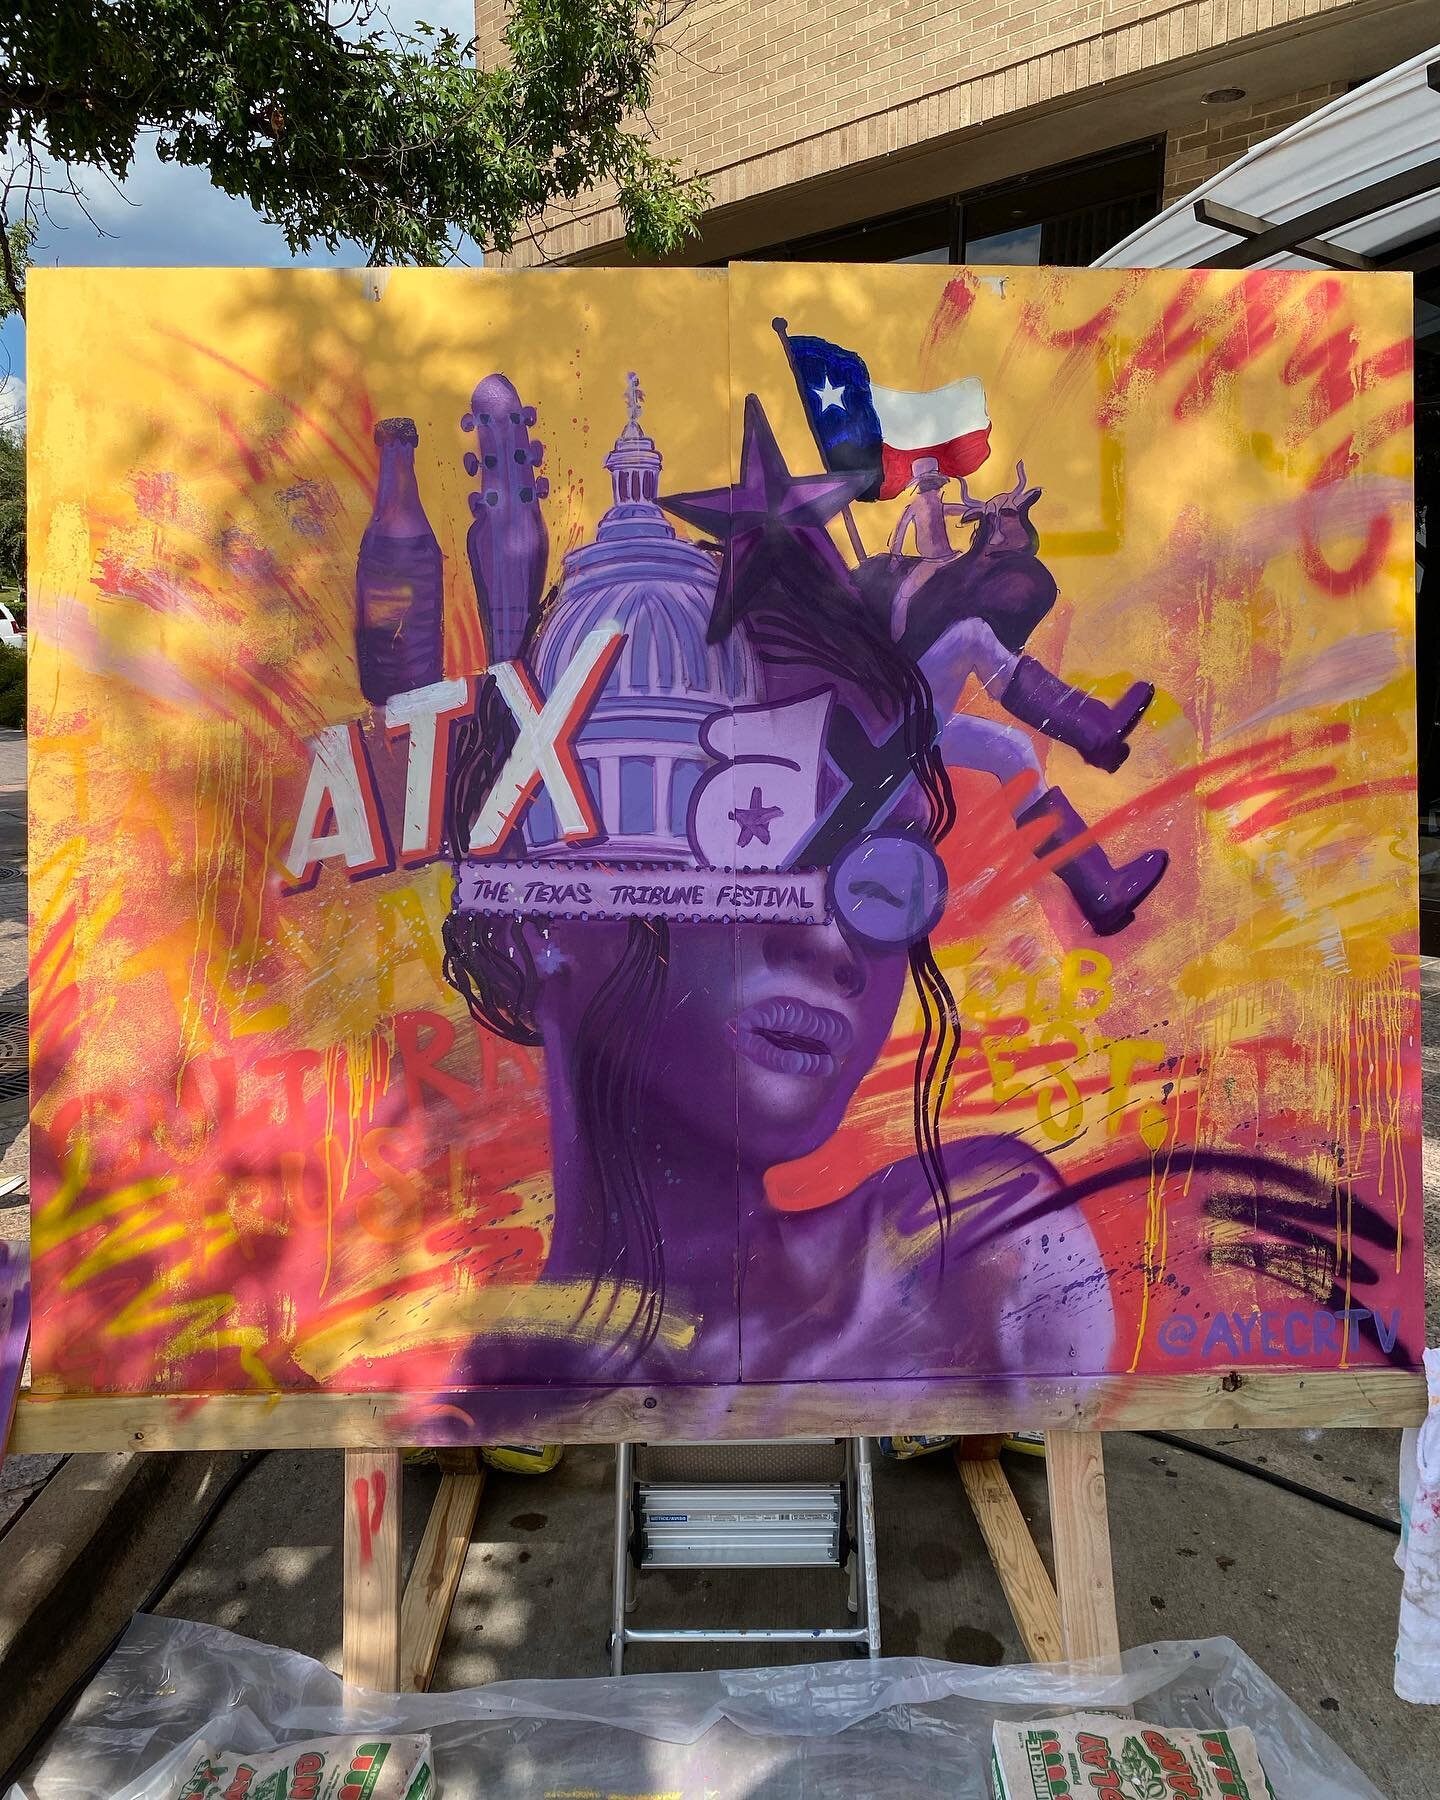 atx aye for the @txculturaltrust #tribfest22
.
.
Live-painted, pop-up style on Congress Ave. This piece found aye home in the @texas_tribune office! Thank you ALL for the opportunity.
.
.
.
#liveart #liveartist #austin #texas #texasart #texasartist #